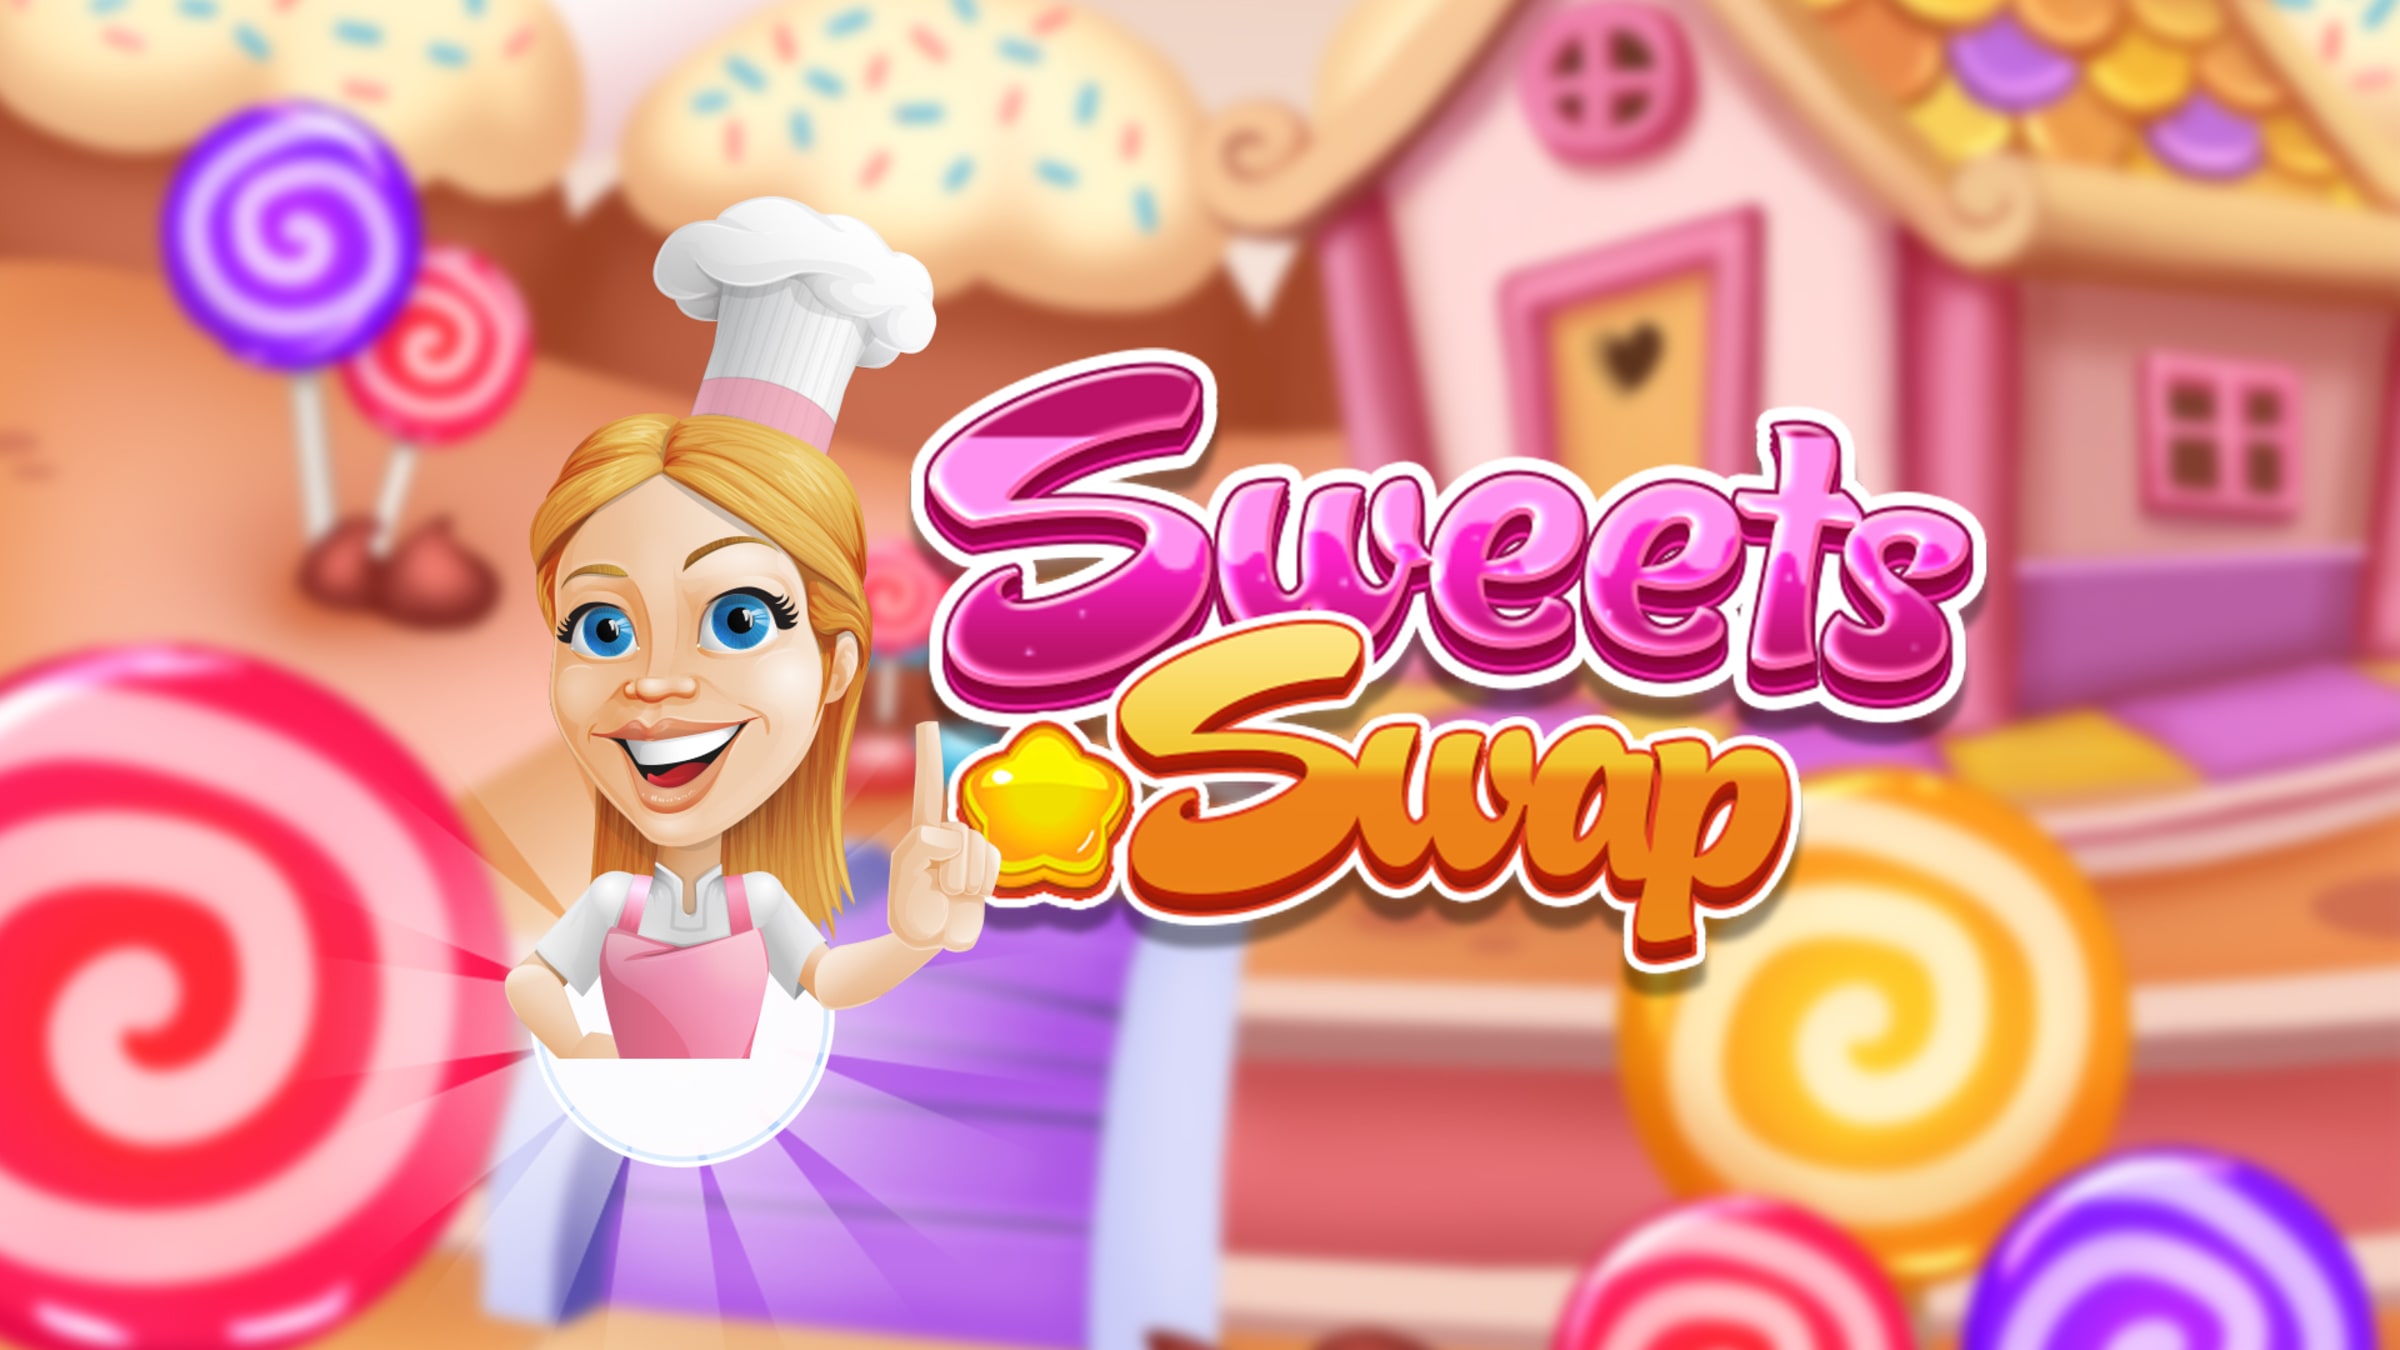 Sweet Sugar Candy for Nintendo Switch - Nintendo Official Site